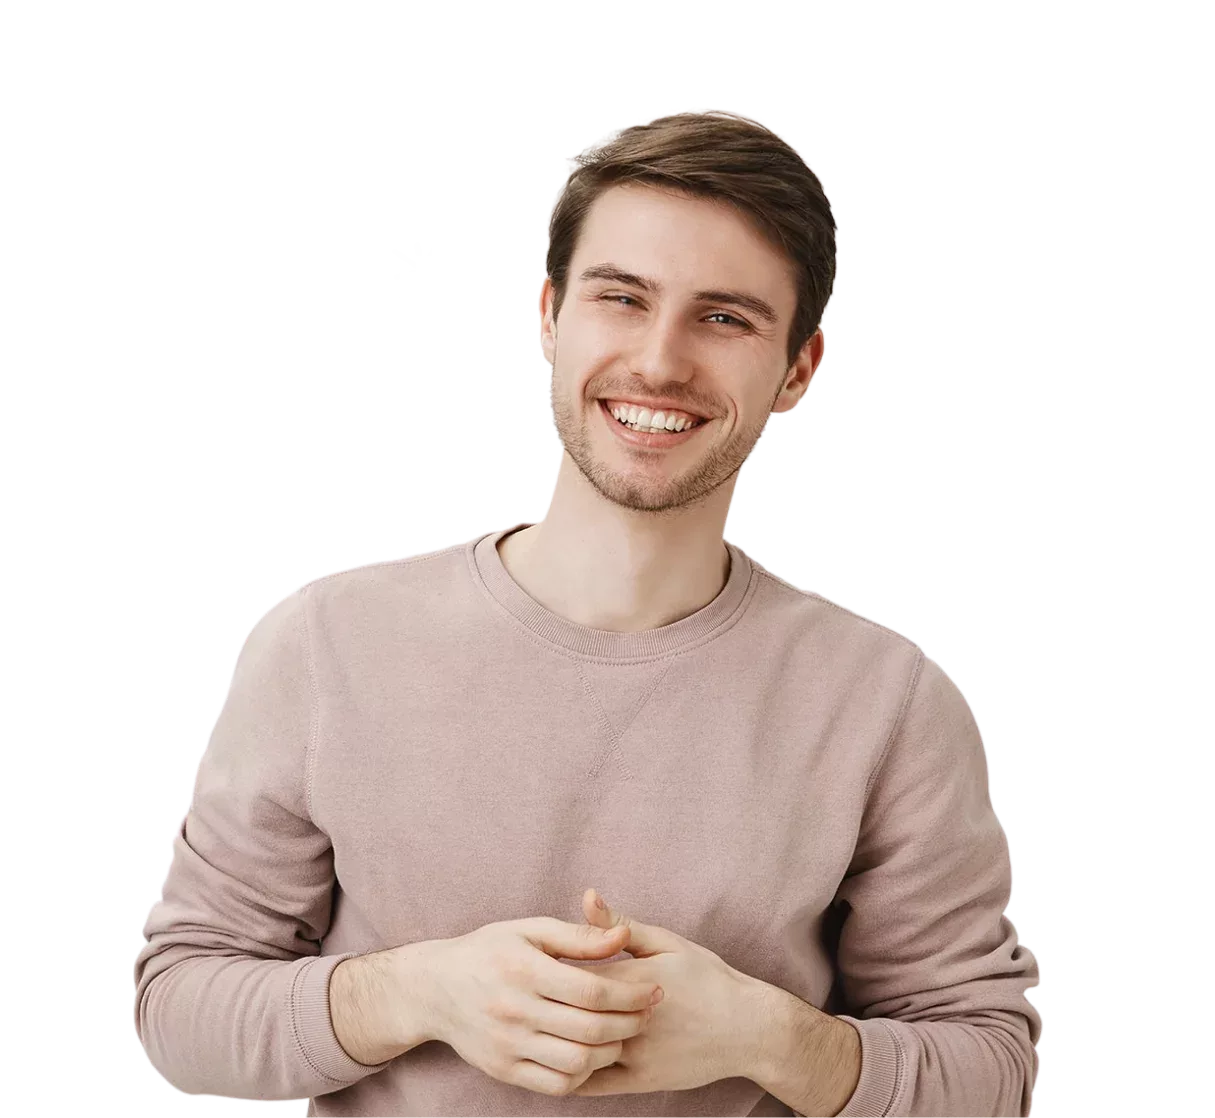 Smiling man with playful illustration